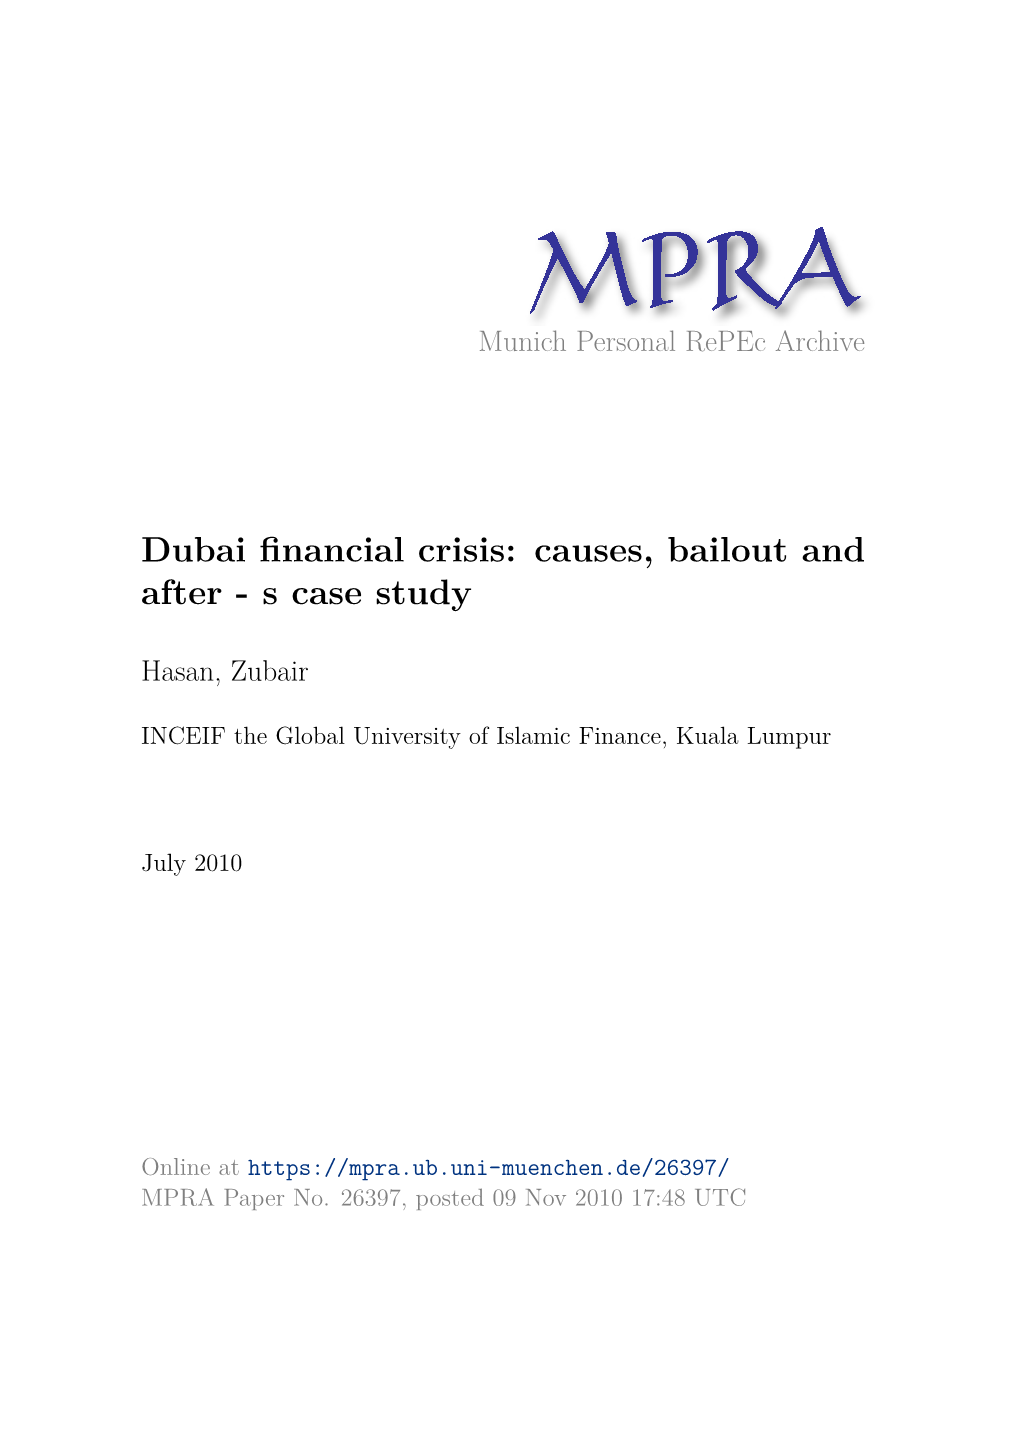 Dubai Financial Crisis: Causes, Bailout and After a Case Study I3v Prof